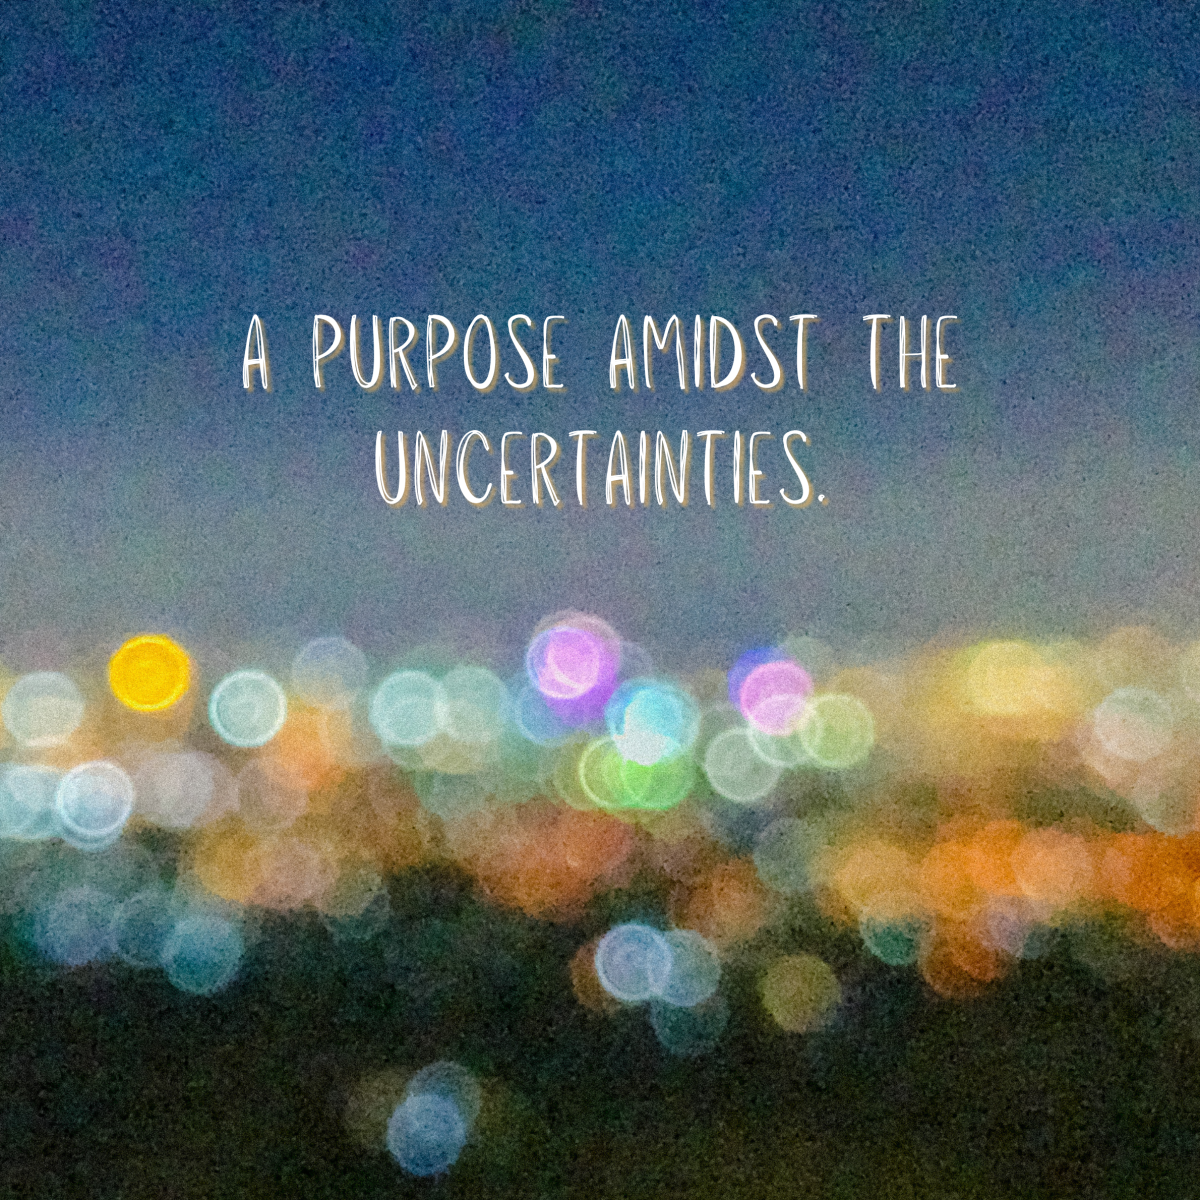 A Purpose Amidst the Uncertainties